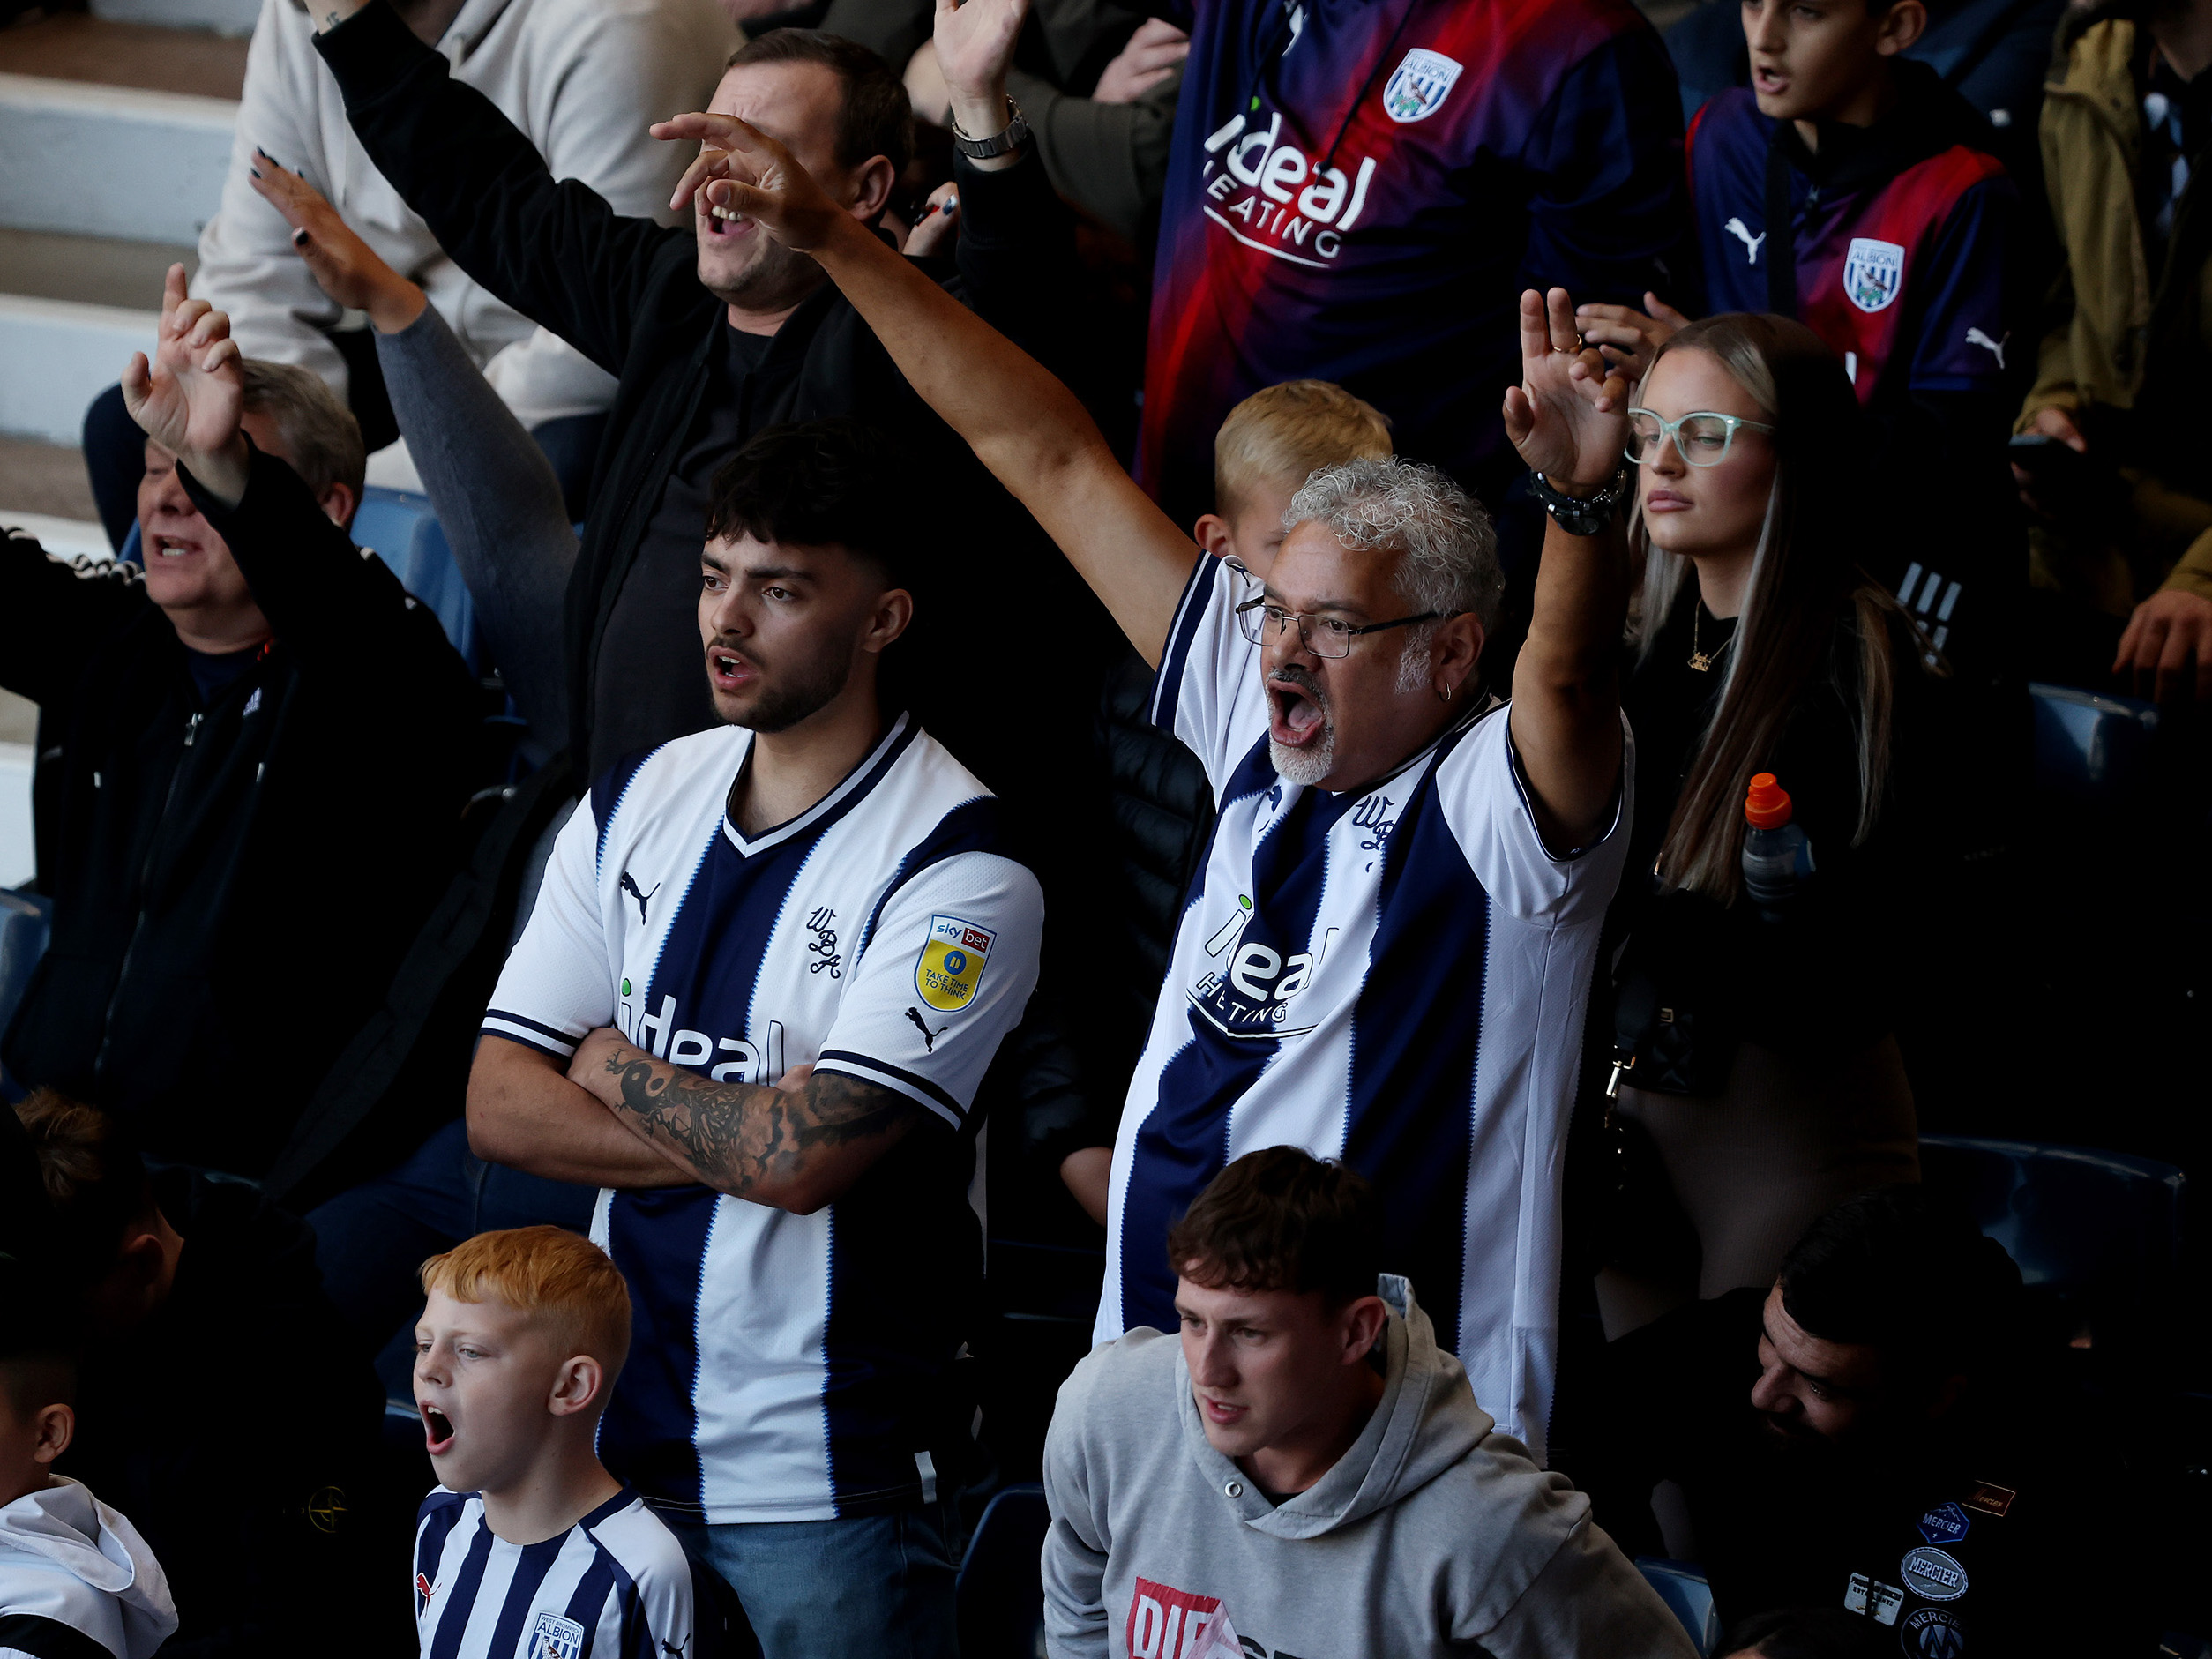 Albion fans cheering at The Hawthorns wearing home shirts